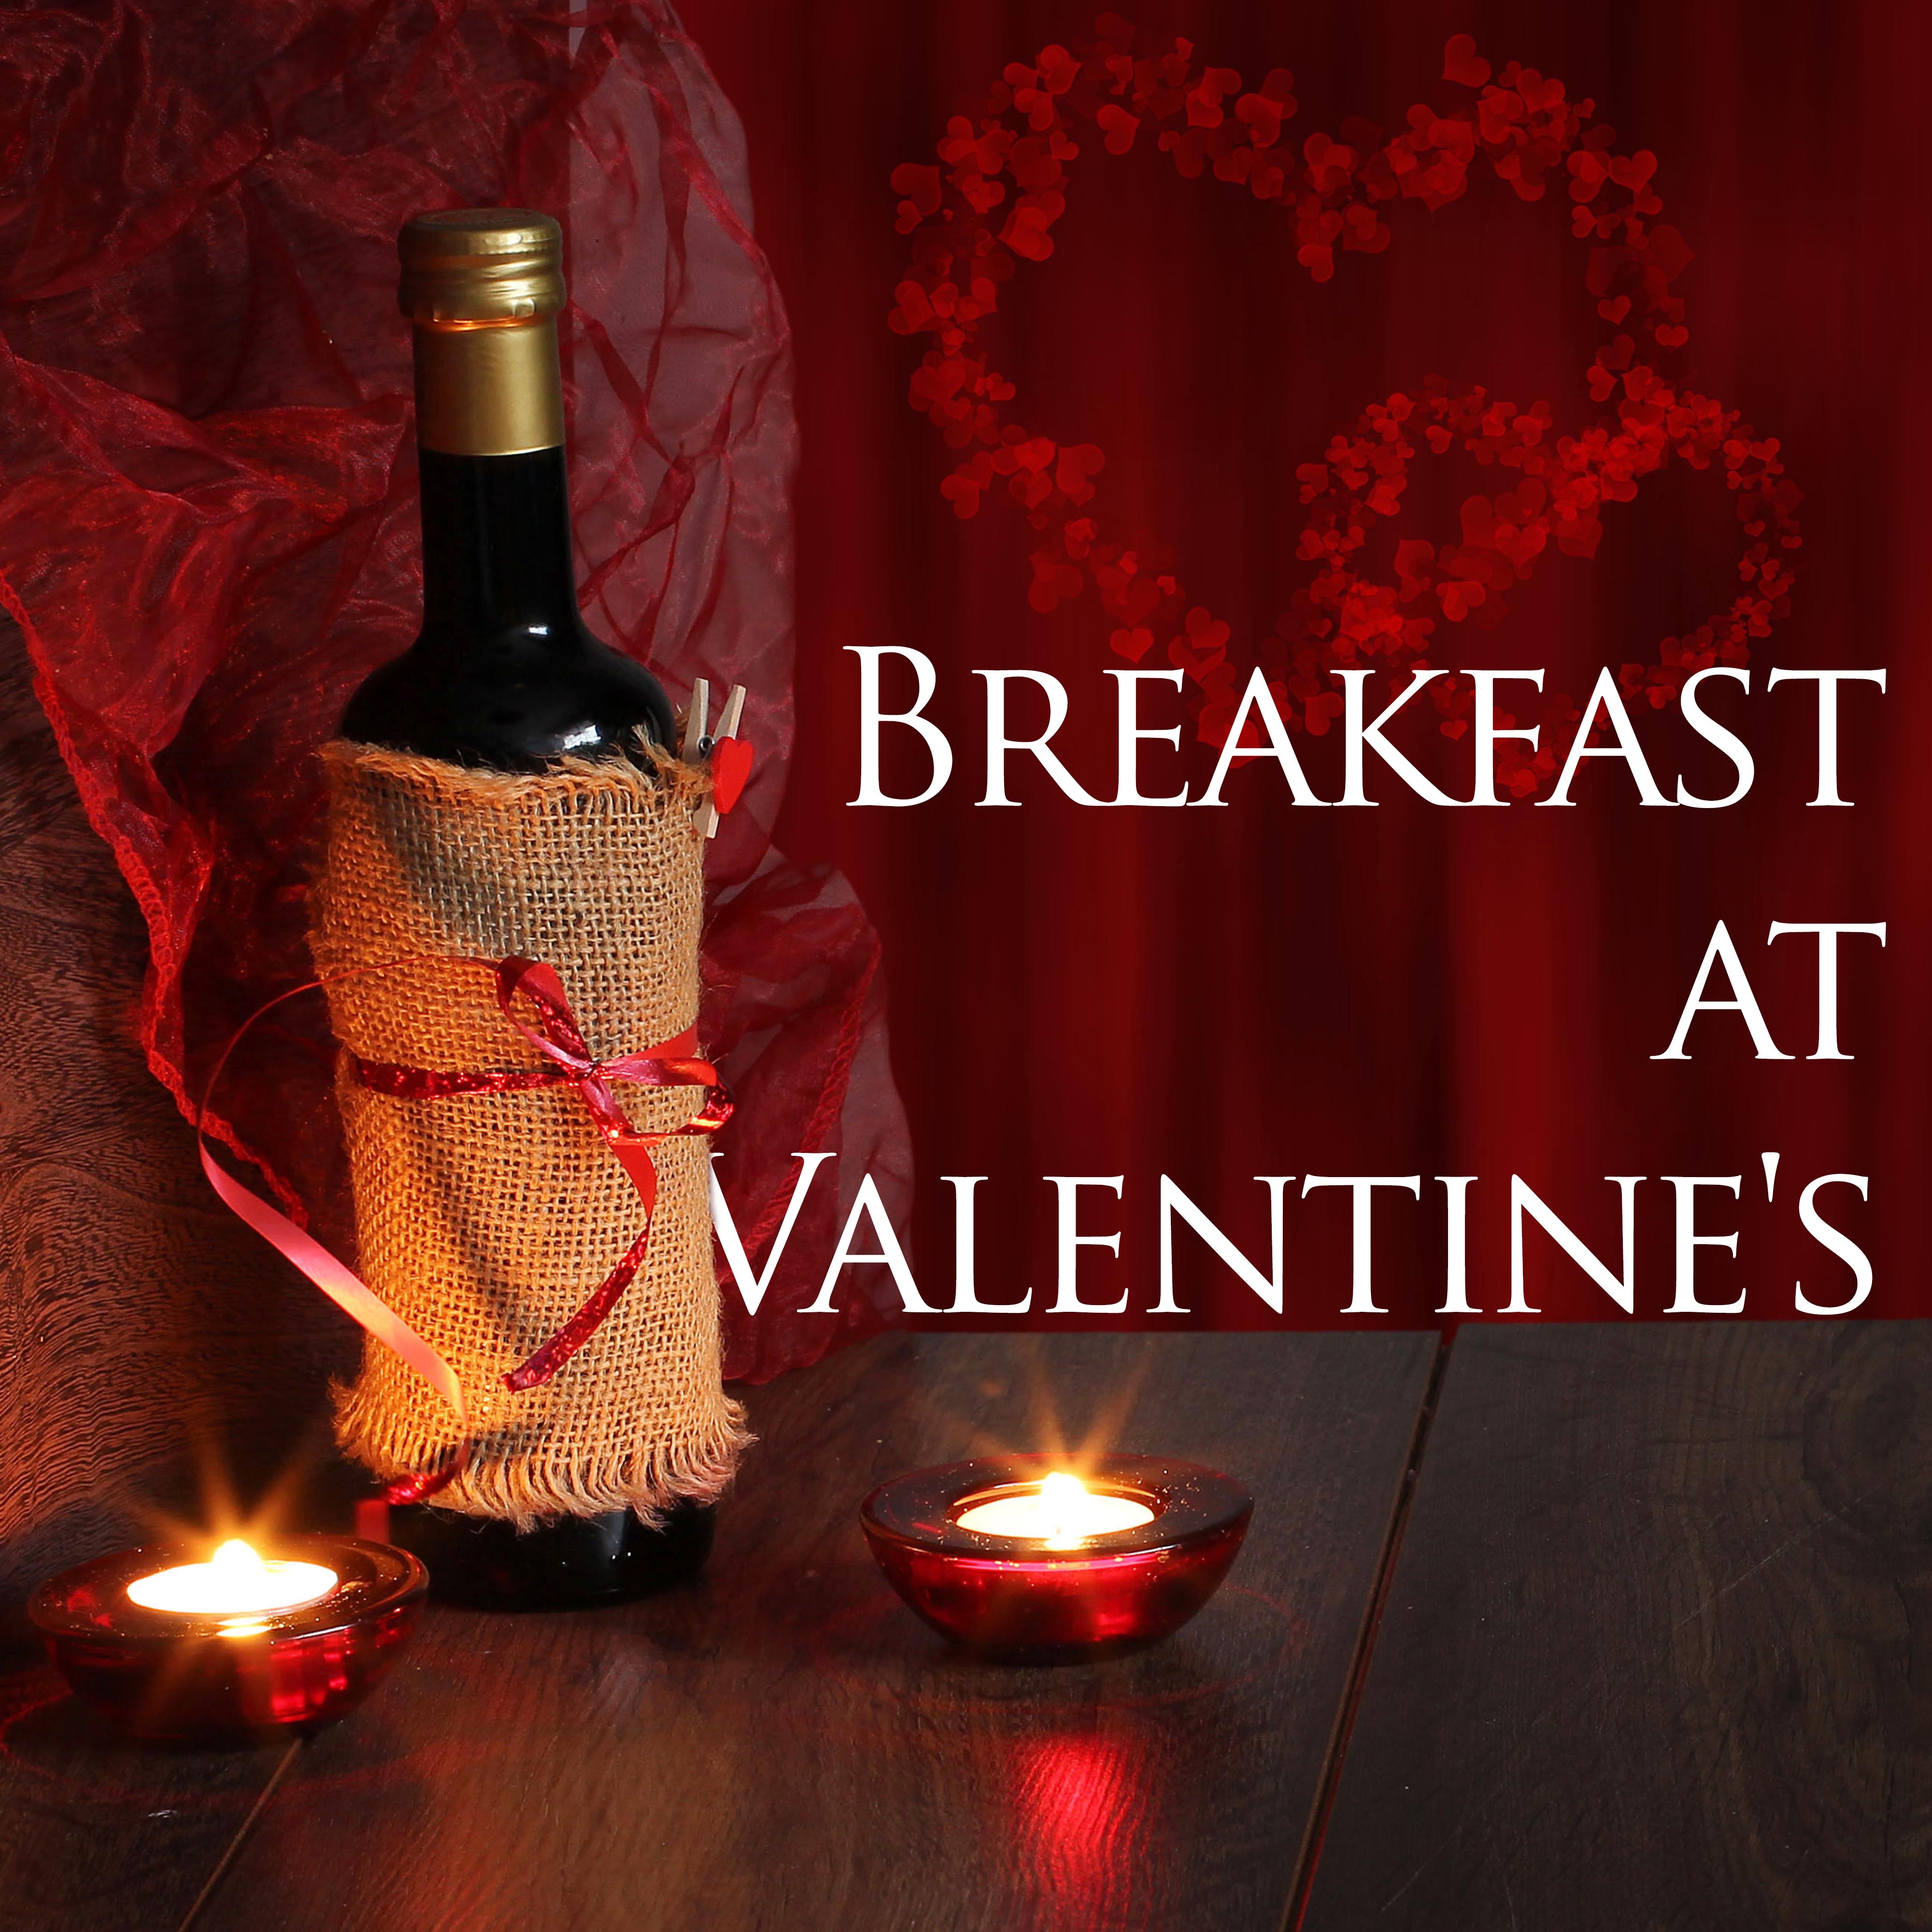 Breakfast at Valentine's - Easy Listening Classical Music to set a Romantic and Sensual Atmosphere